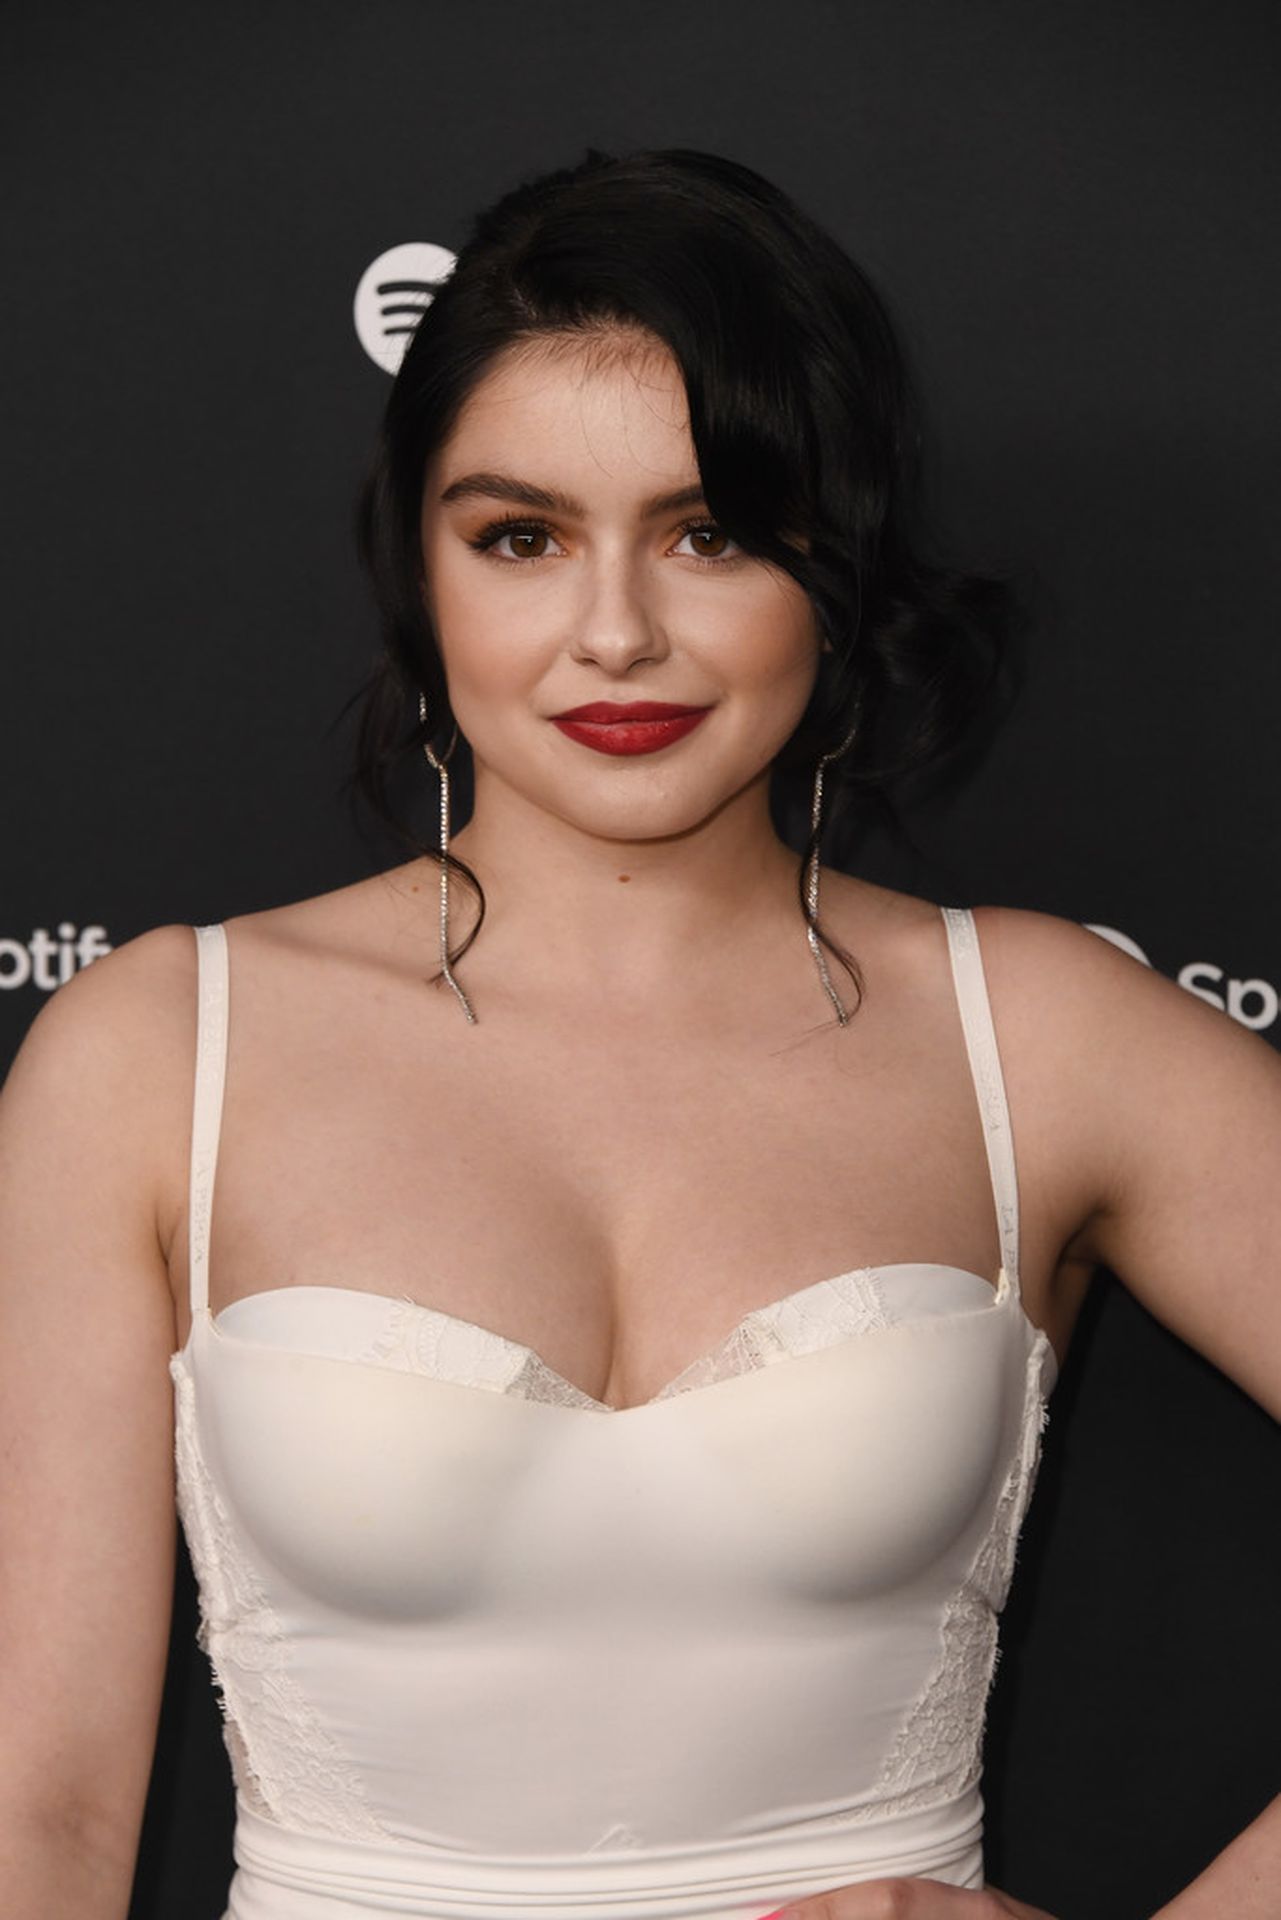 Ariel Winter Shows Her Cleavage At The Best New Artist Party 0024